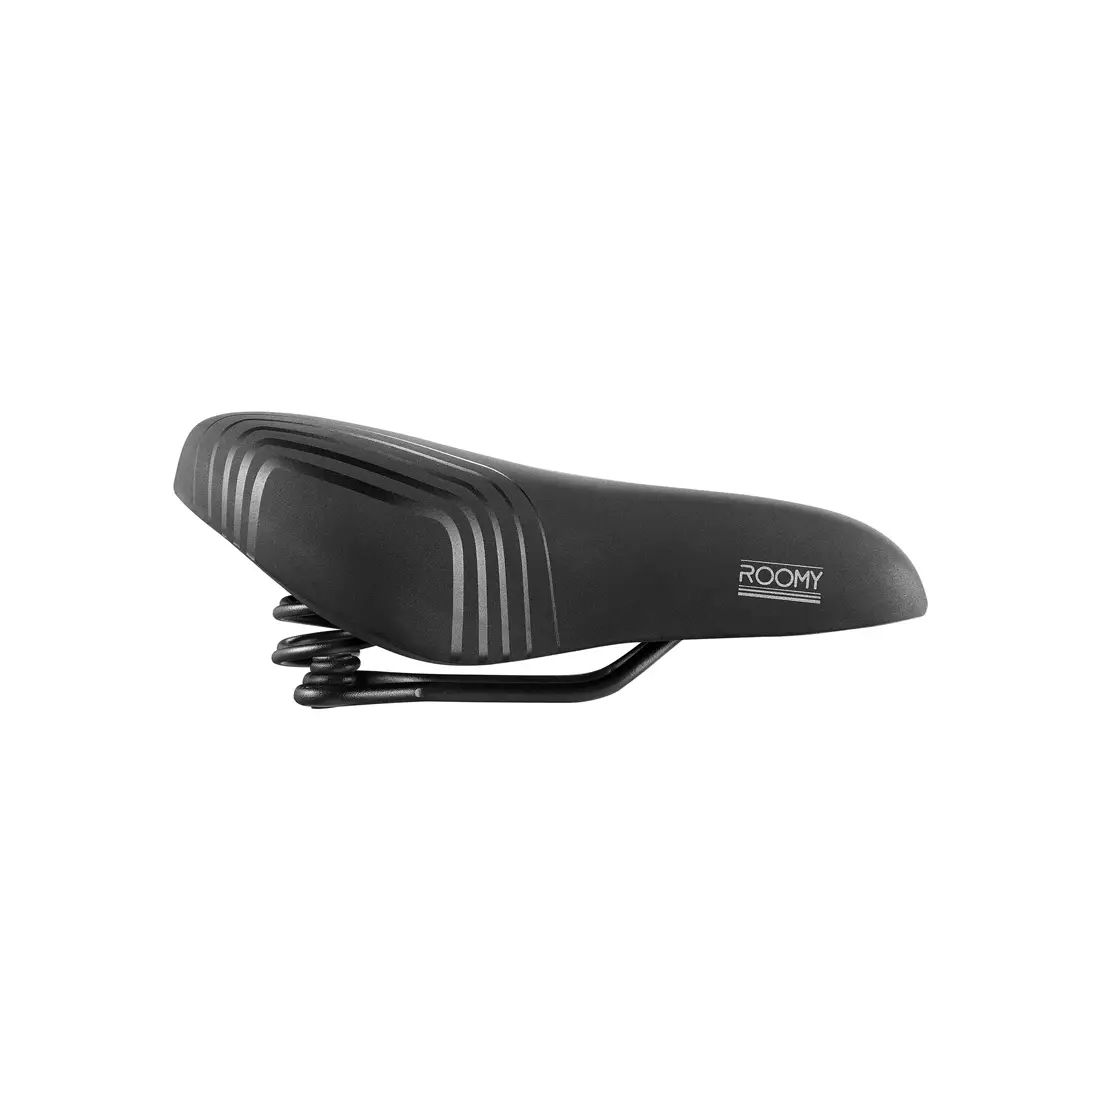 SELLEROYAL CLASSIC MODERATE bicycle saddle 60st. ROOMY men SR-8VA8HS0A08069